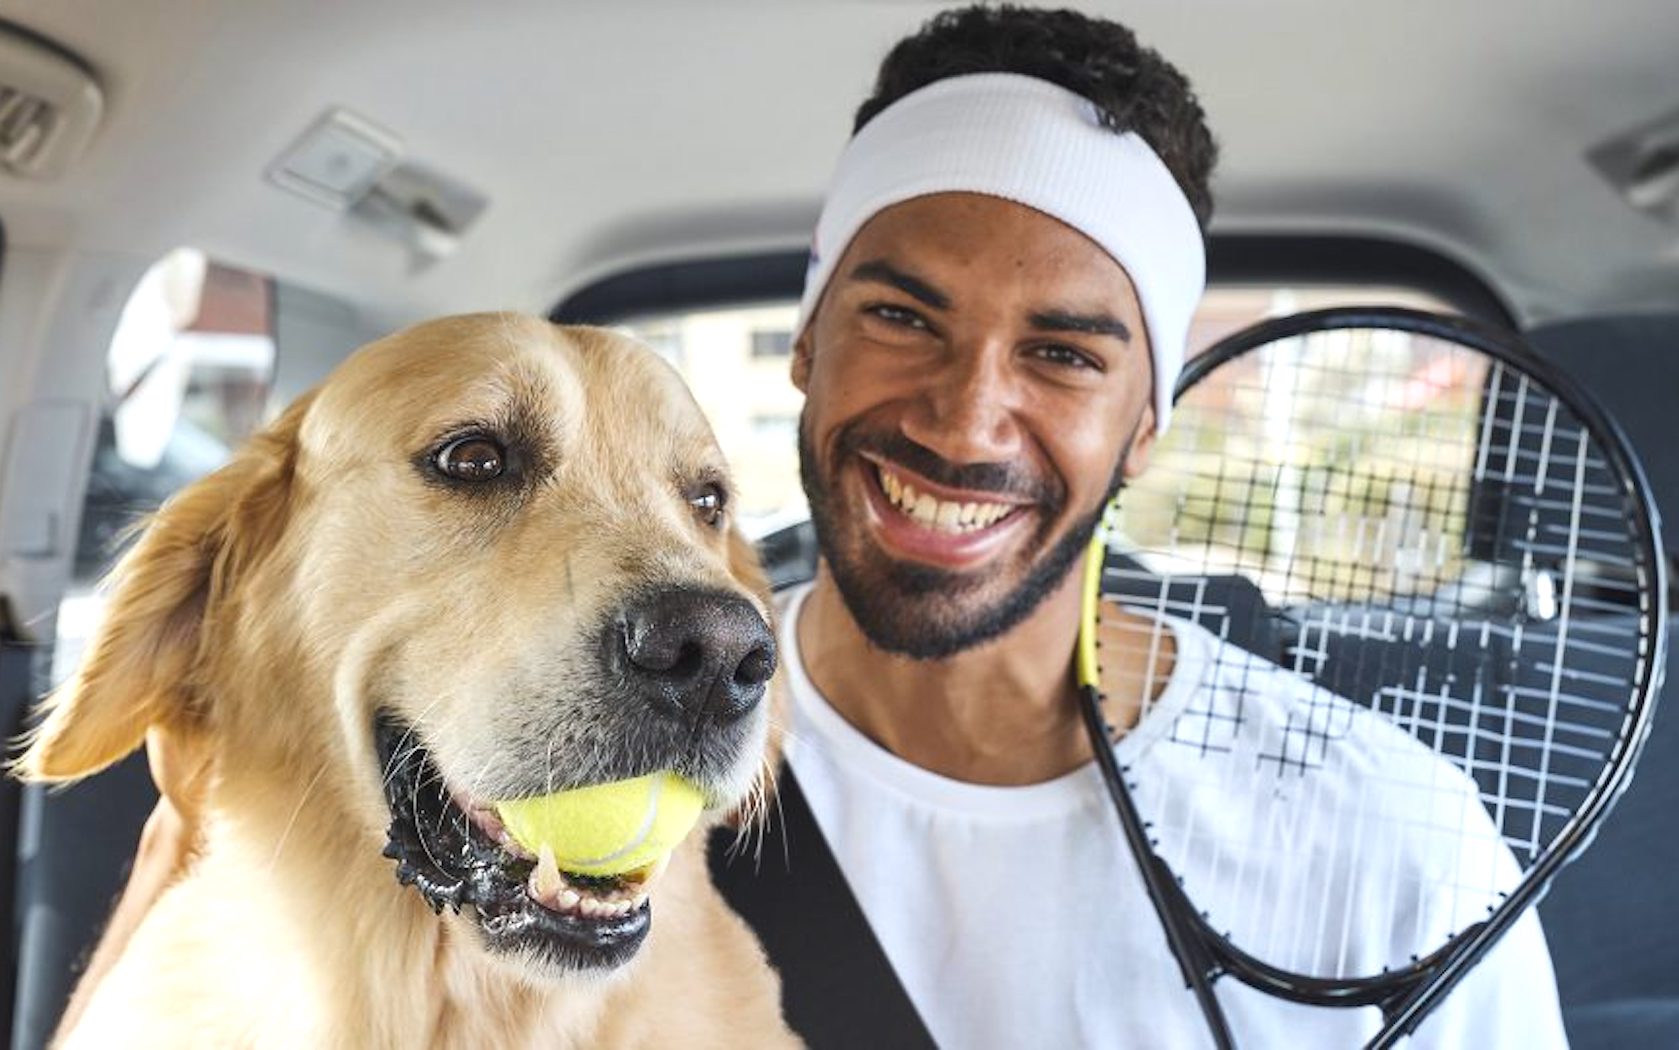 Uber Pet launches in Australia on March 10 on a trial basis in Sydney and Brisbane.